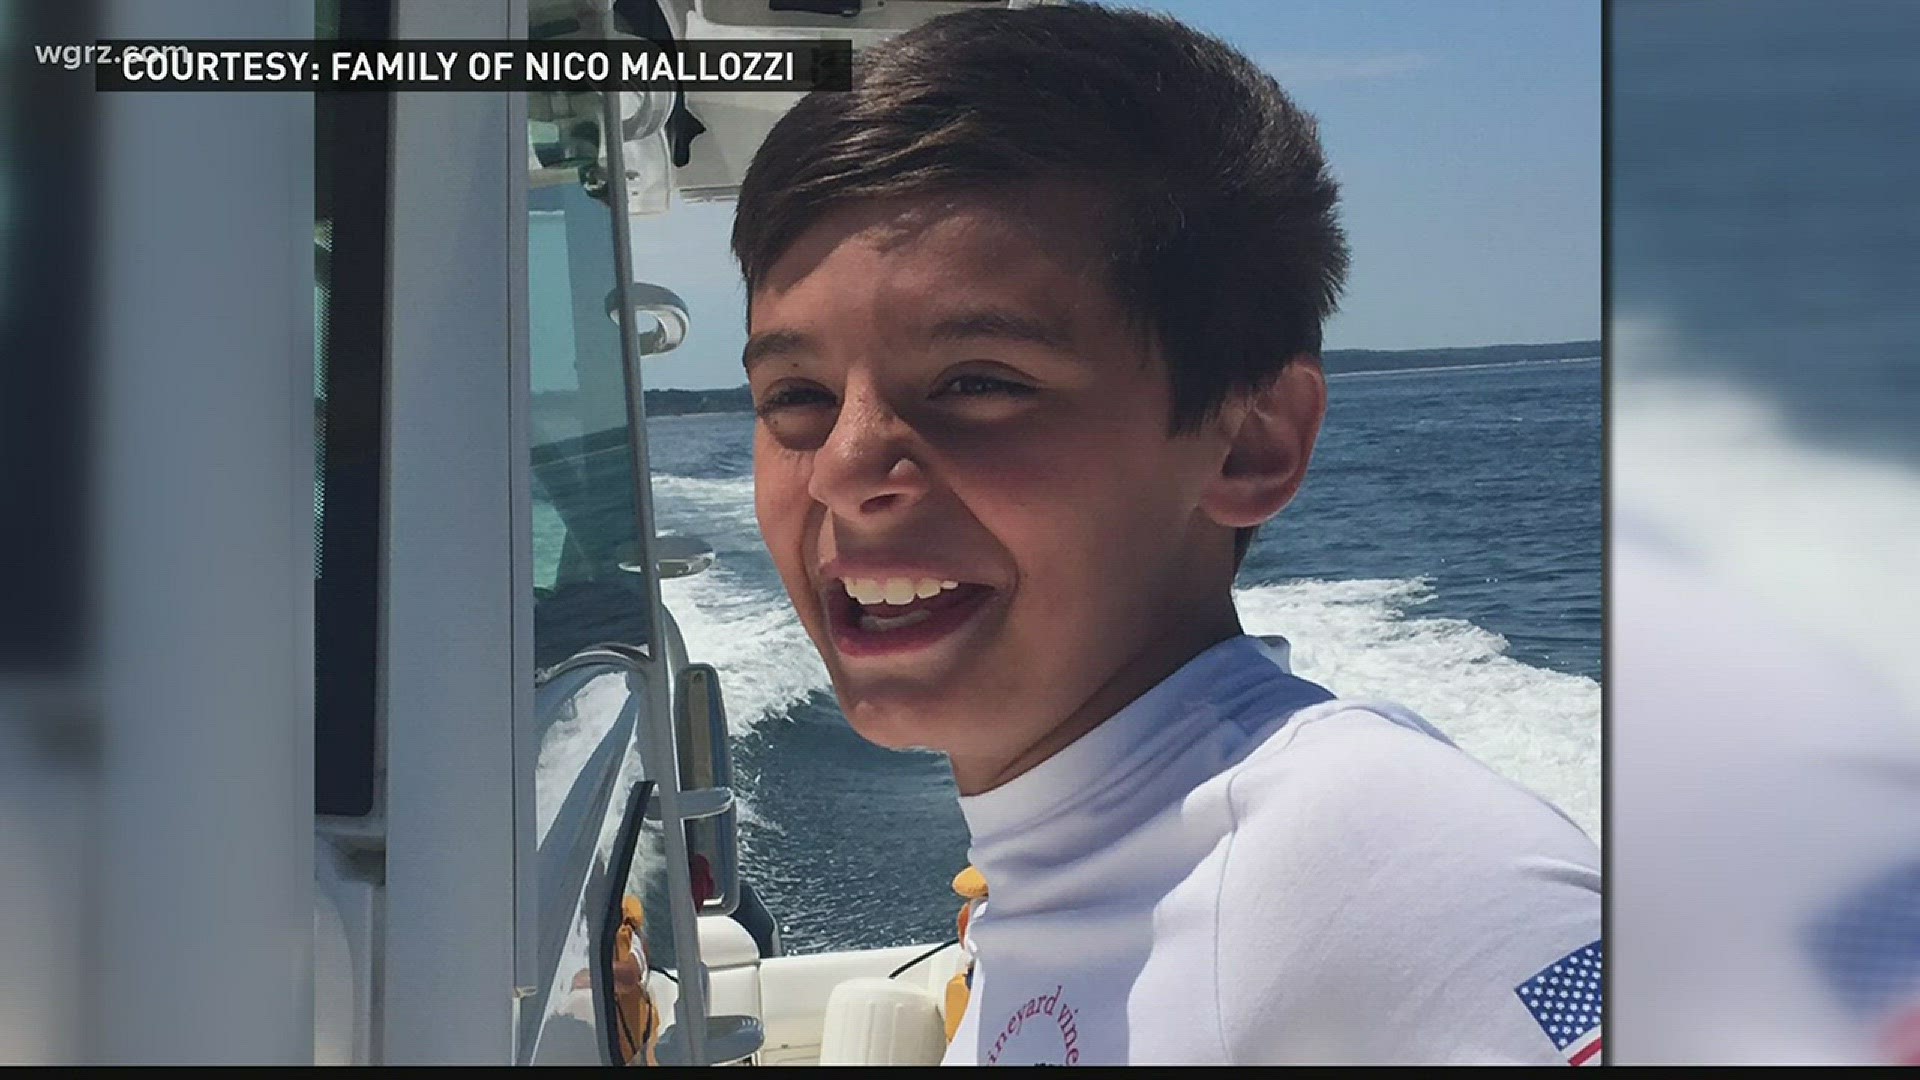 Connecticut Boy Who Visited WNY, Gets The Flu, Dies